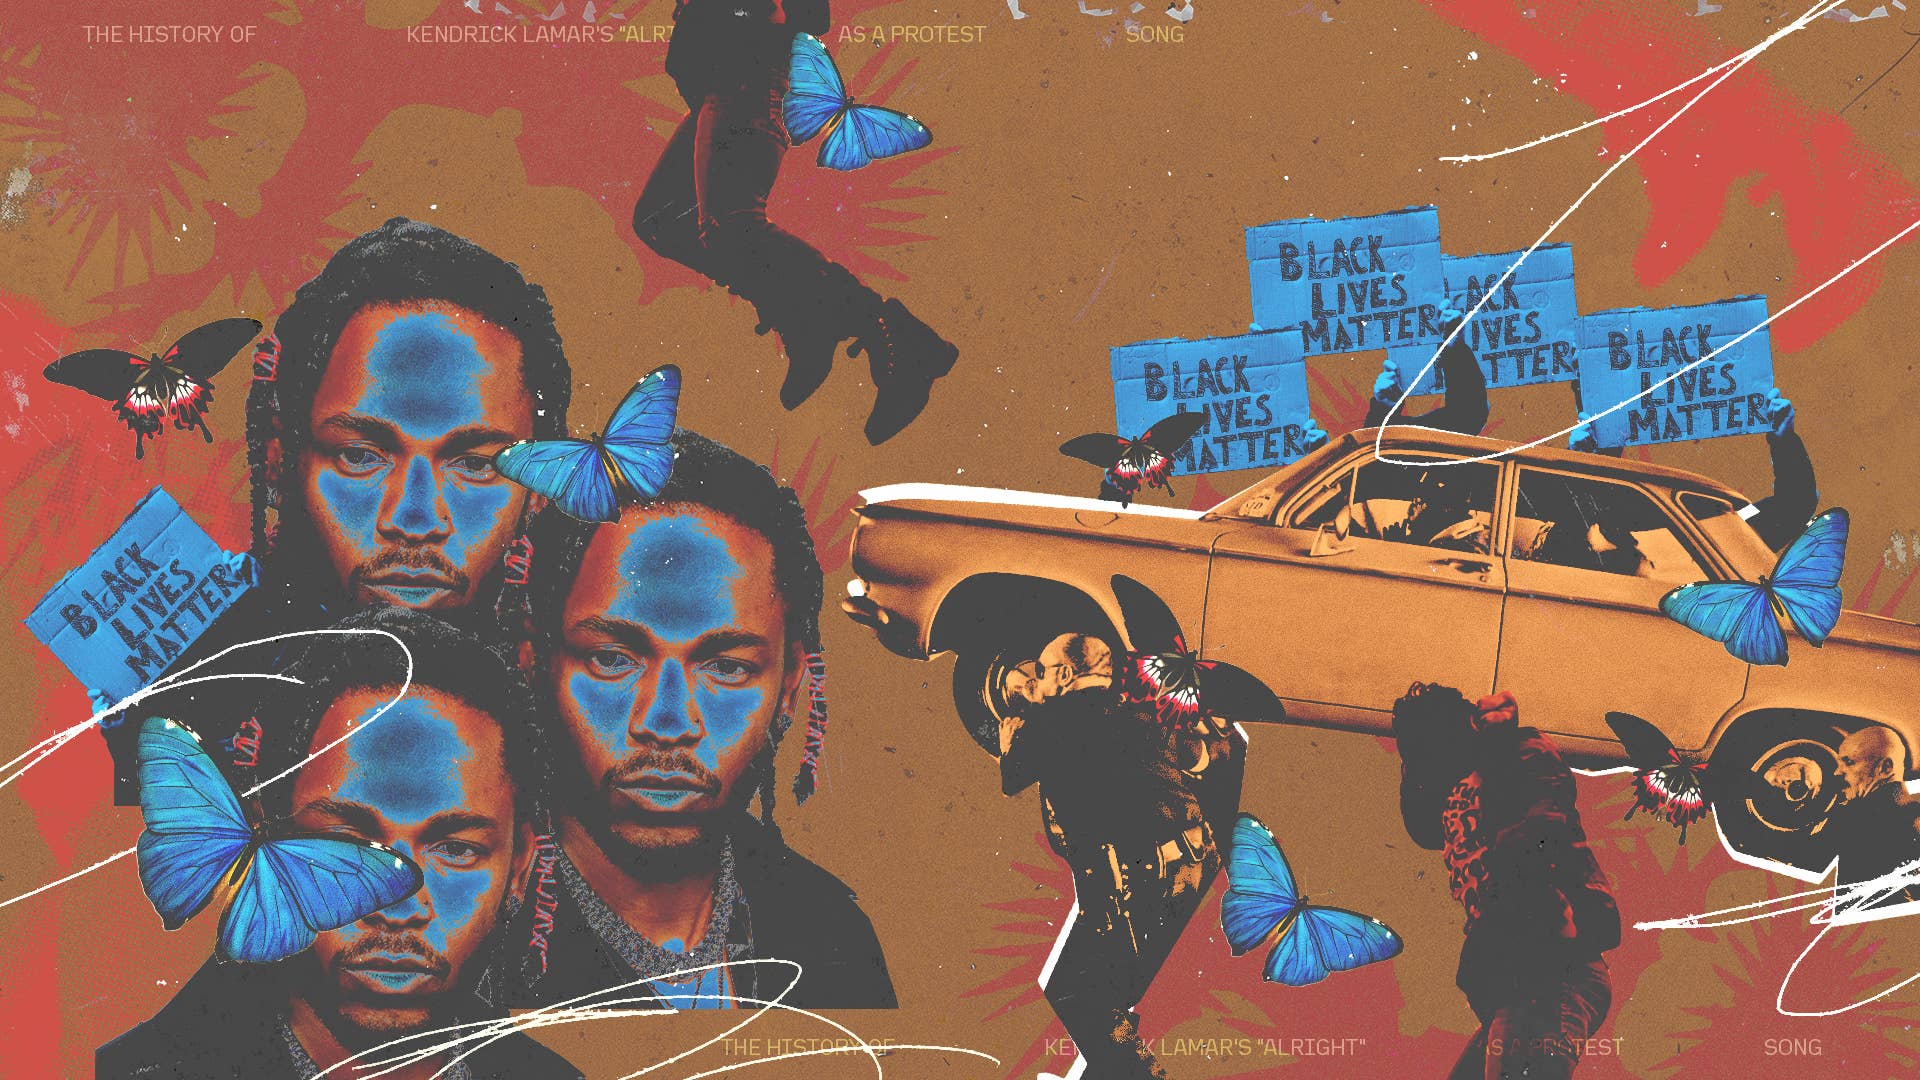 The History of Kendrick Lamar’s "Alright" as a Protest Song